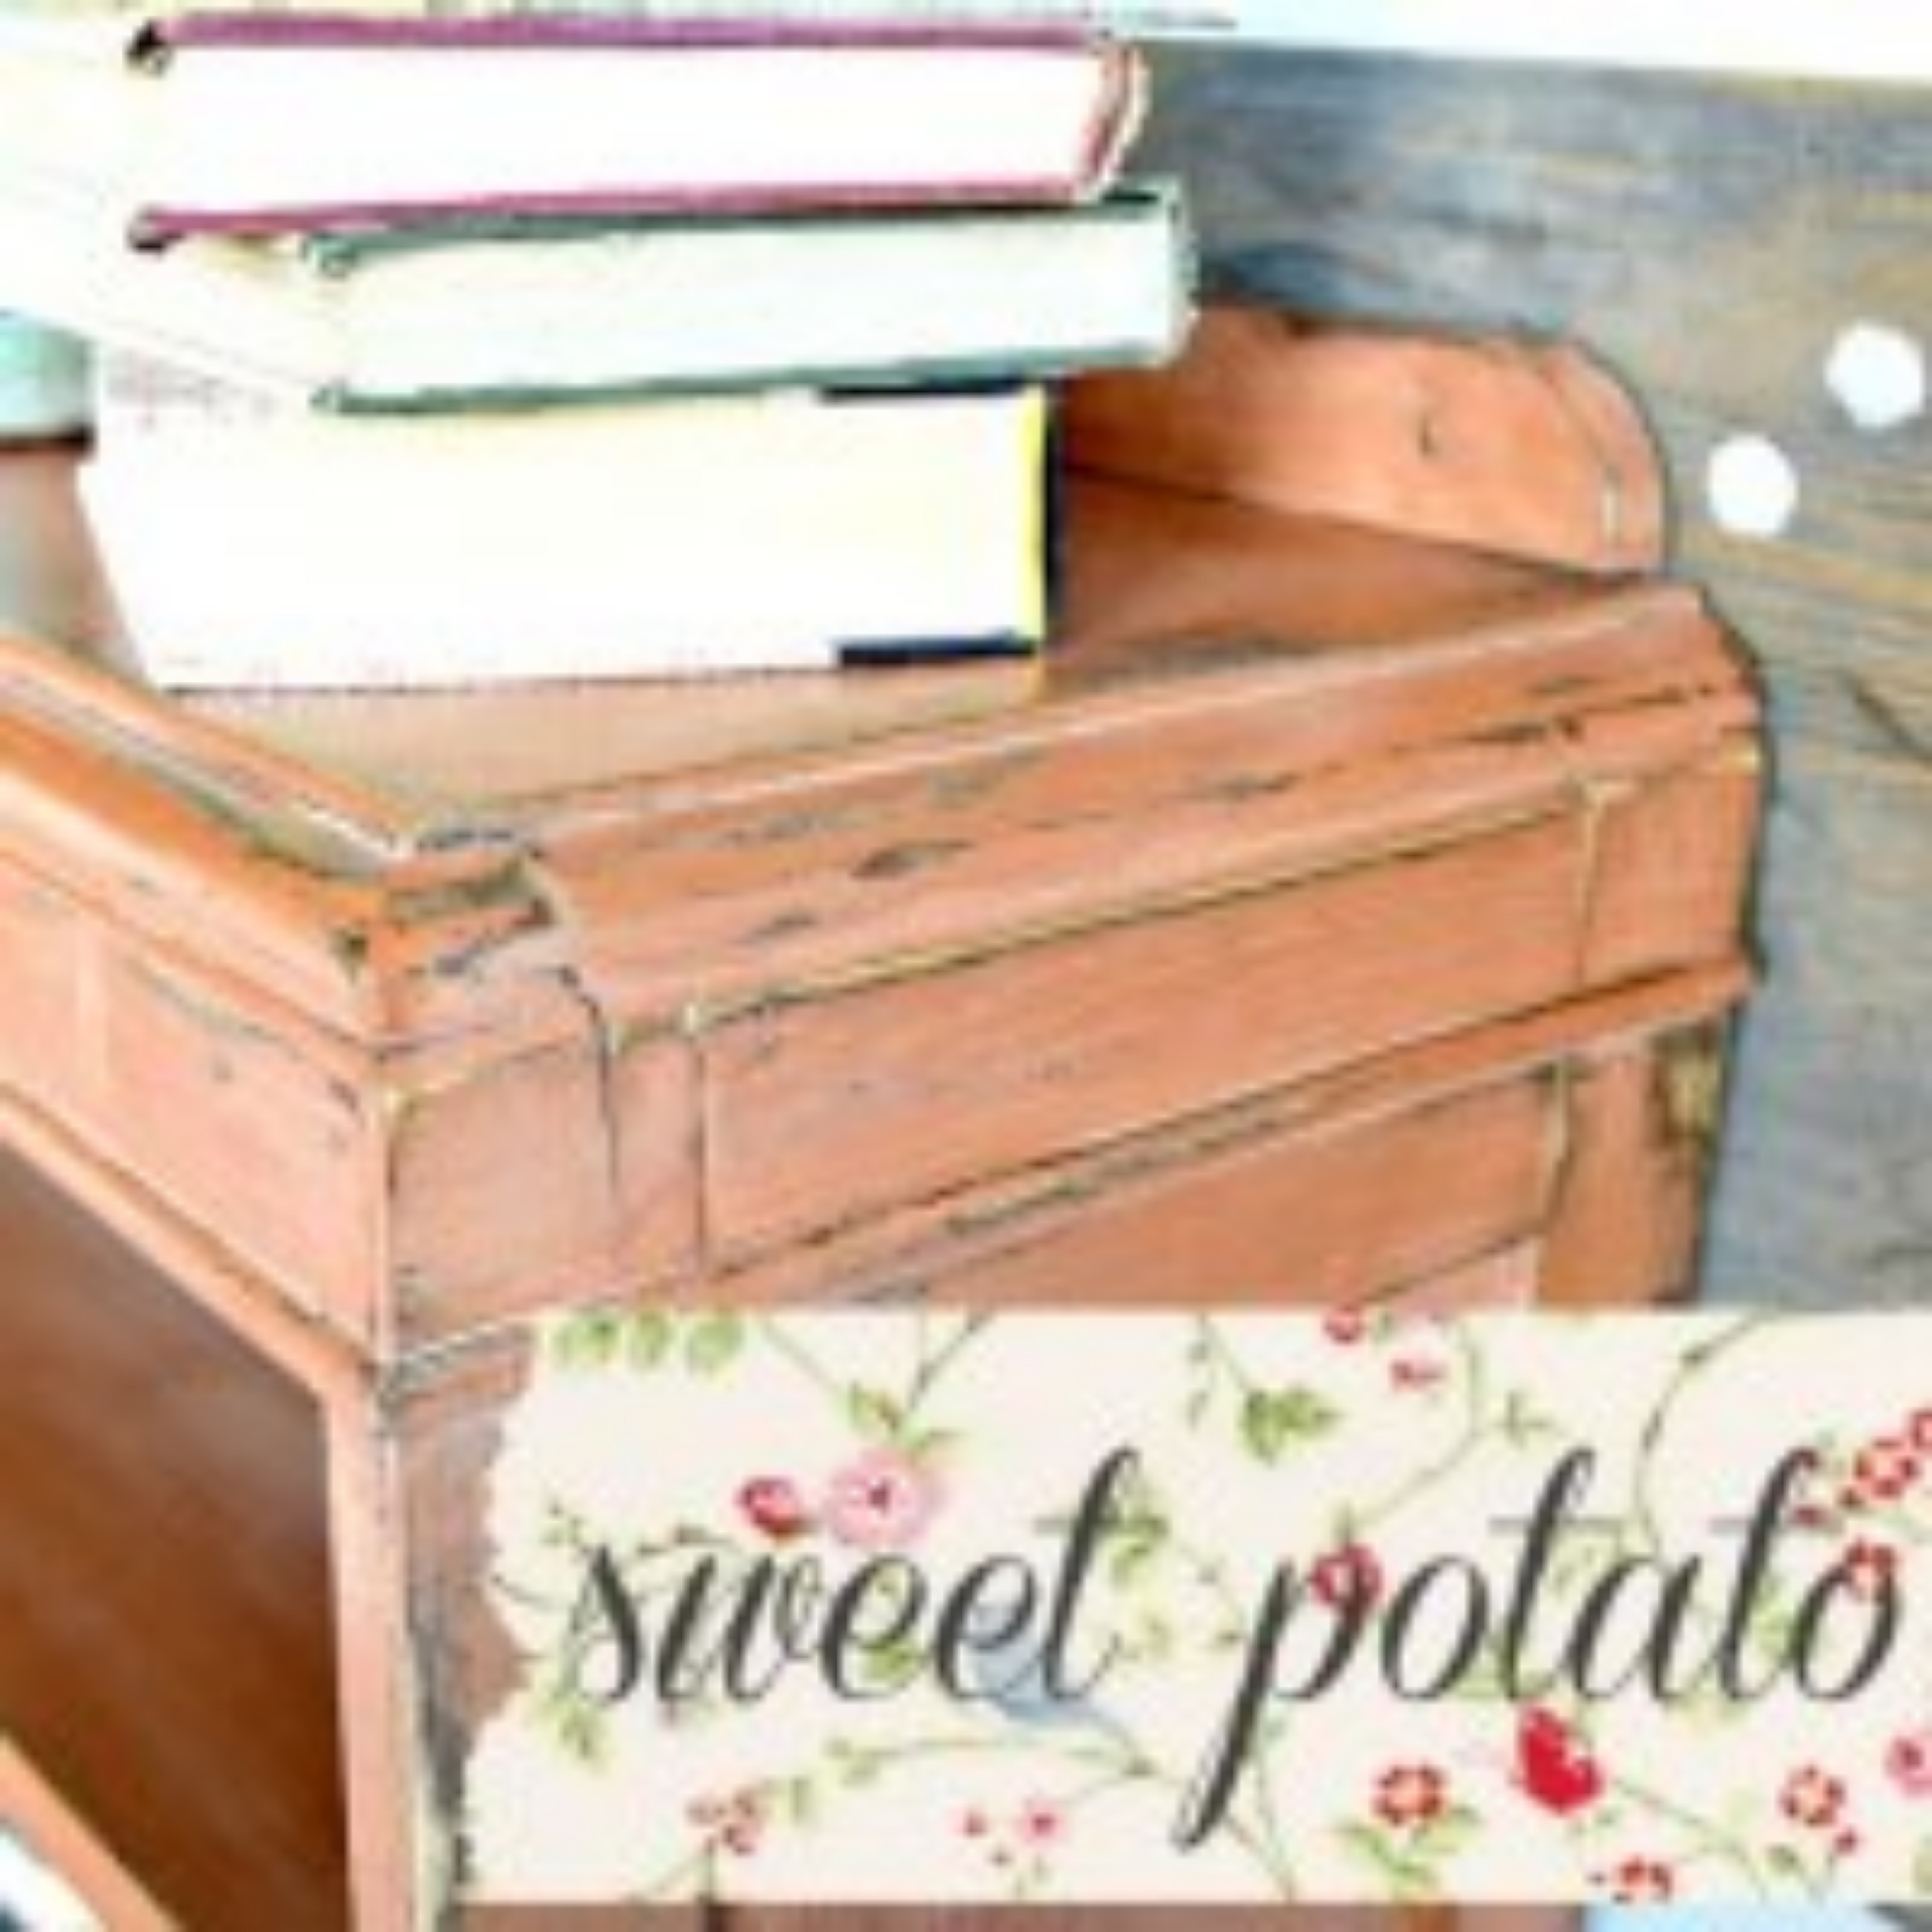 Cabinet painted in Sweet Potato (burnt orange) by Sweet Pickins Milk Paint available at Milton's Daughter